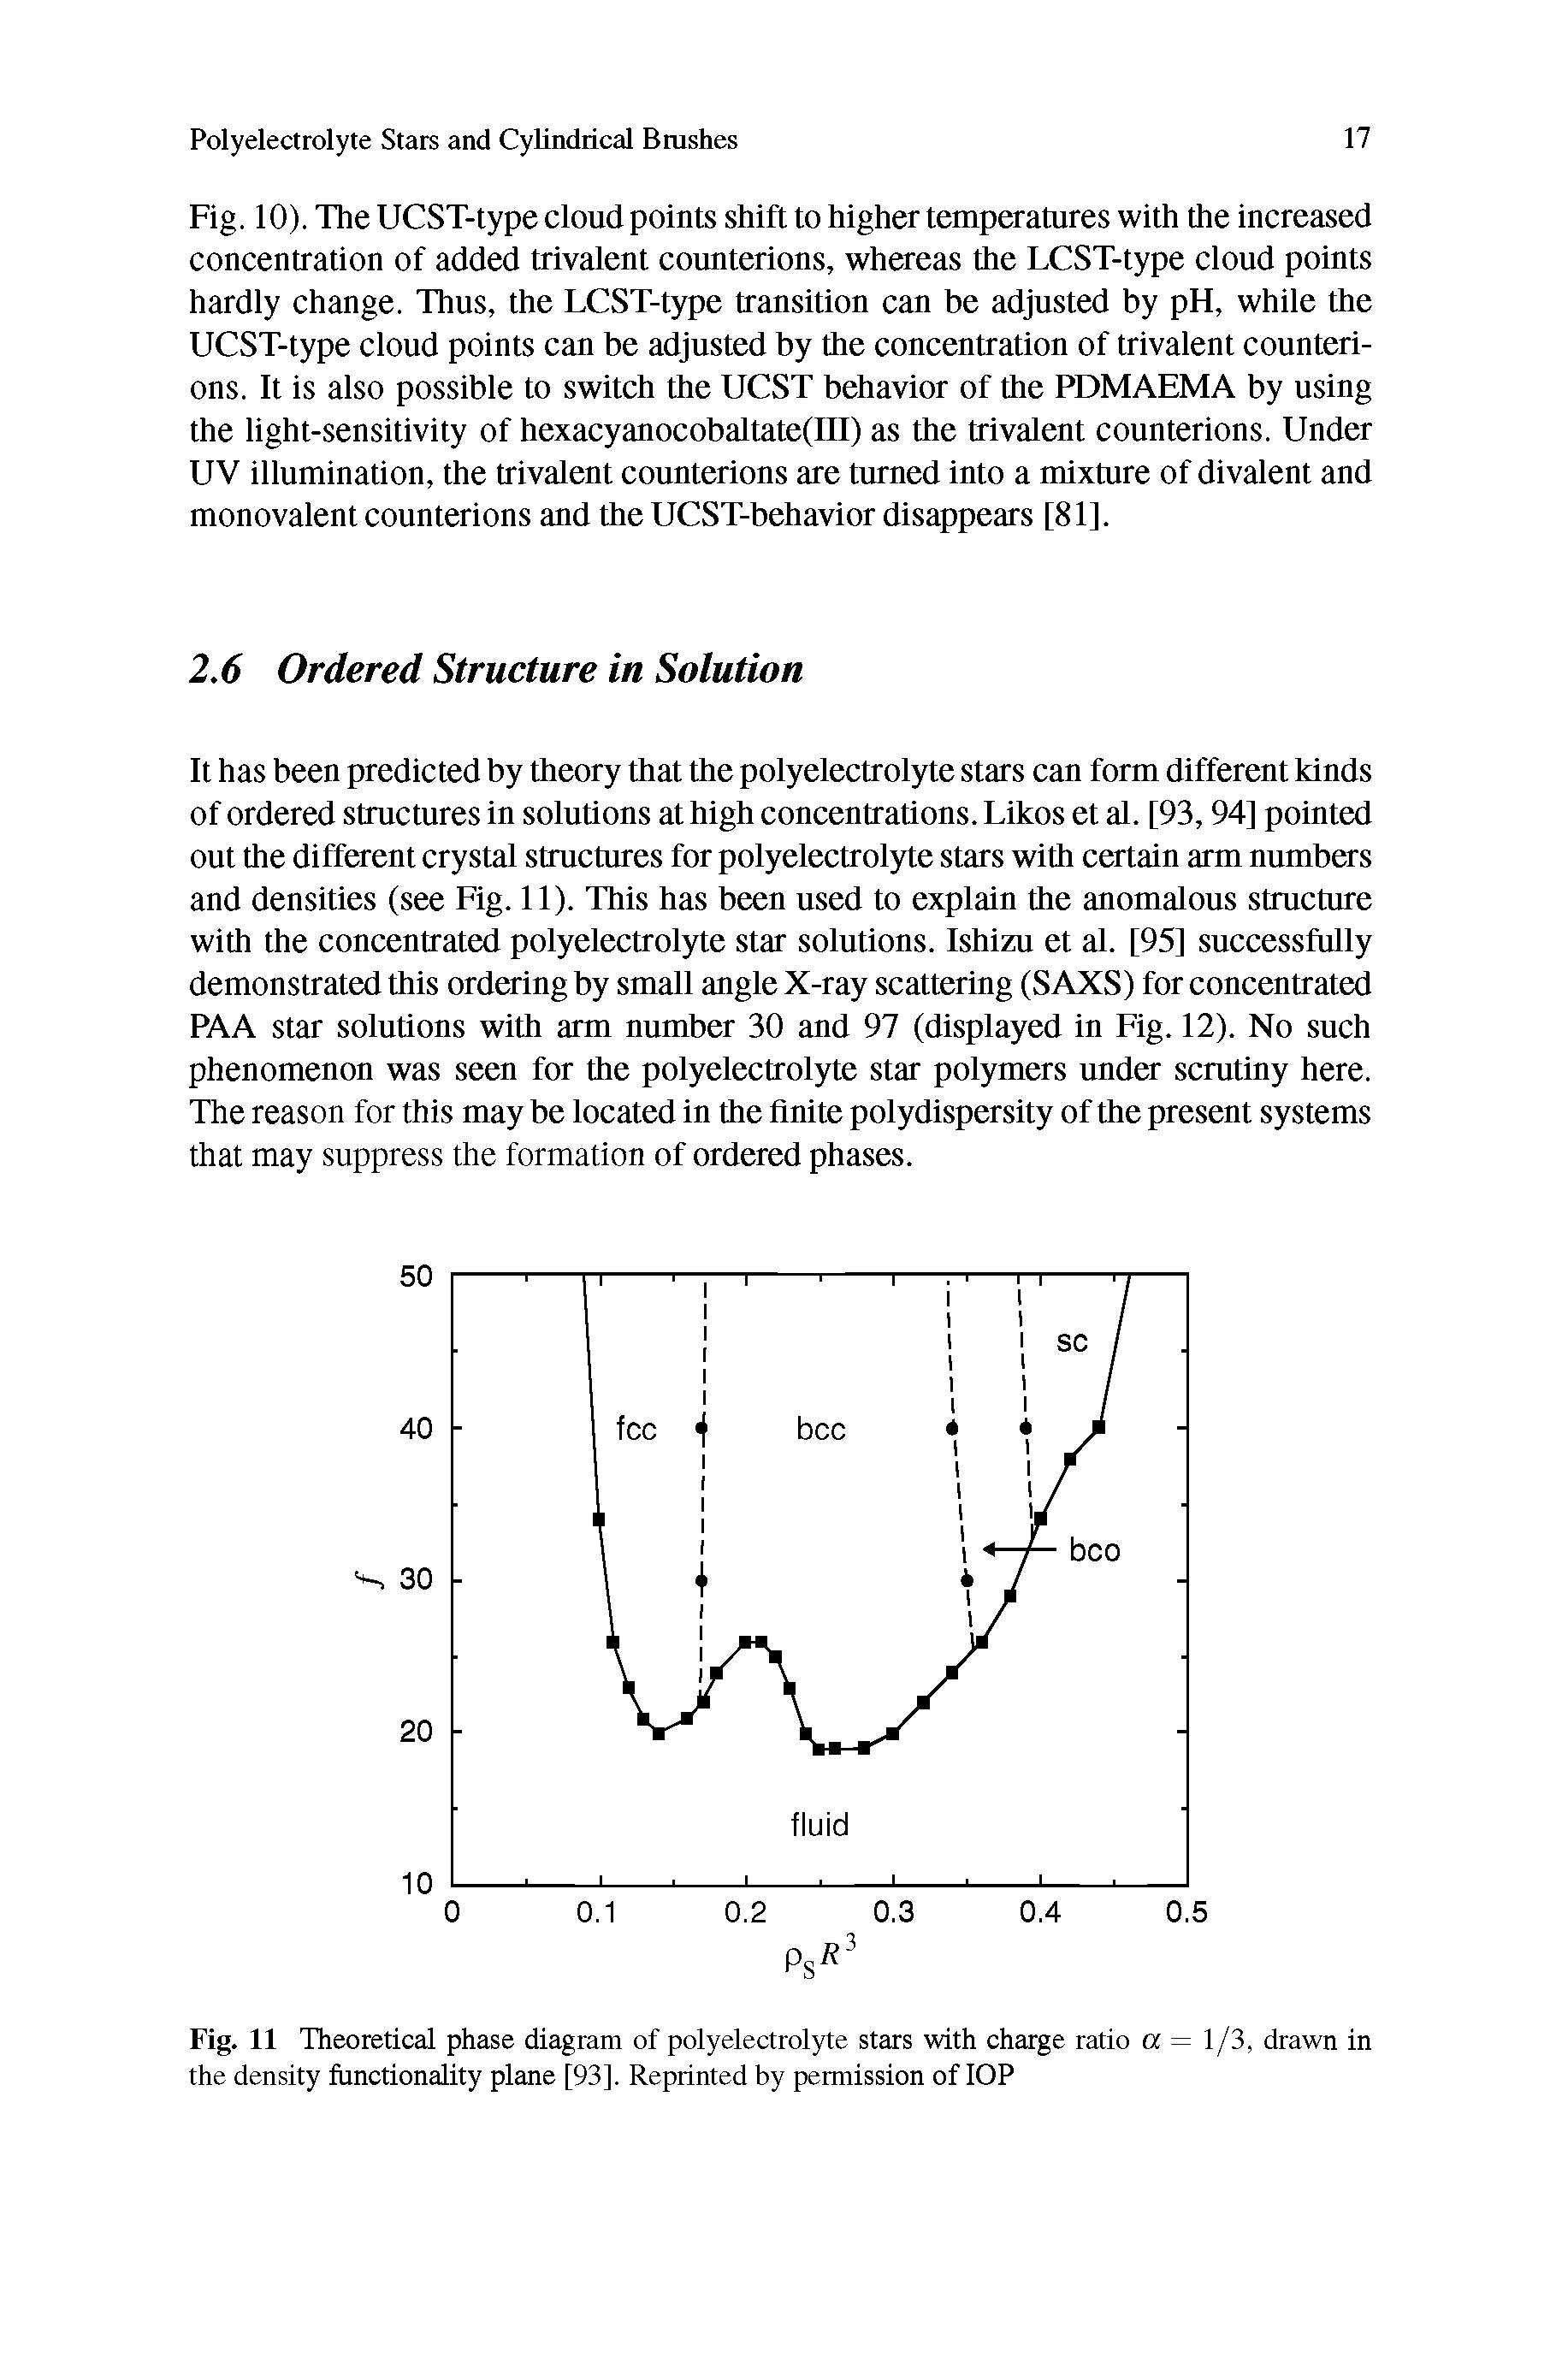 Fig. 10). The UCST-type cloud points shift to higher temperatures with the increased concentration of added trivalent counterions, whereas the LCST-type cloud points hardly change. Thus, the LCST-type transition can be adjusted by pH, while the UCST-type cloud points can be adjusted by the concentration of trivalent counterions. It is also possible to switch the UCST behavior of the PDMAEMA by using the light-sensitivity of hexacyanocobaltate(III) as the trivalent counterions. Under UV illumination, the trivalent counterions are turned into a mixture of divalent and monovalent counterions and the UCST-behavior disappears [81].